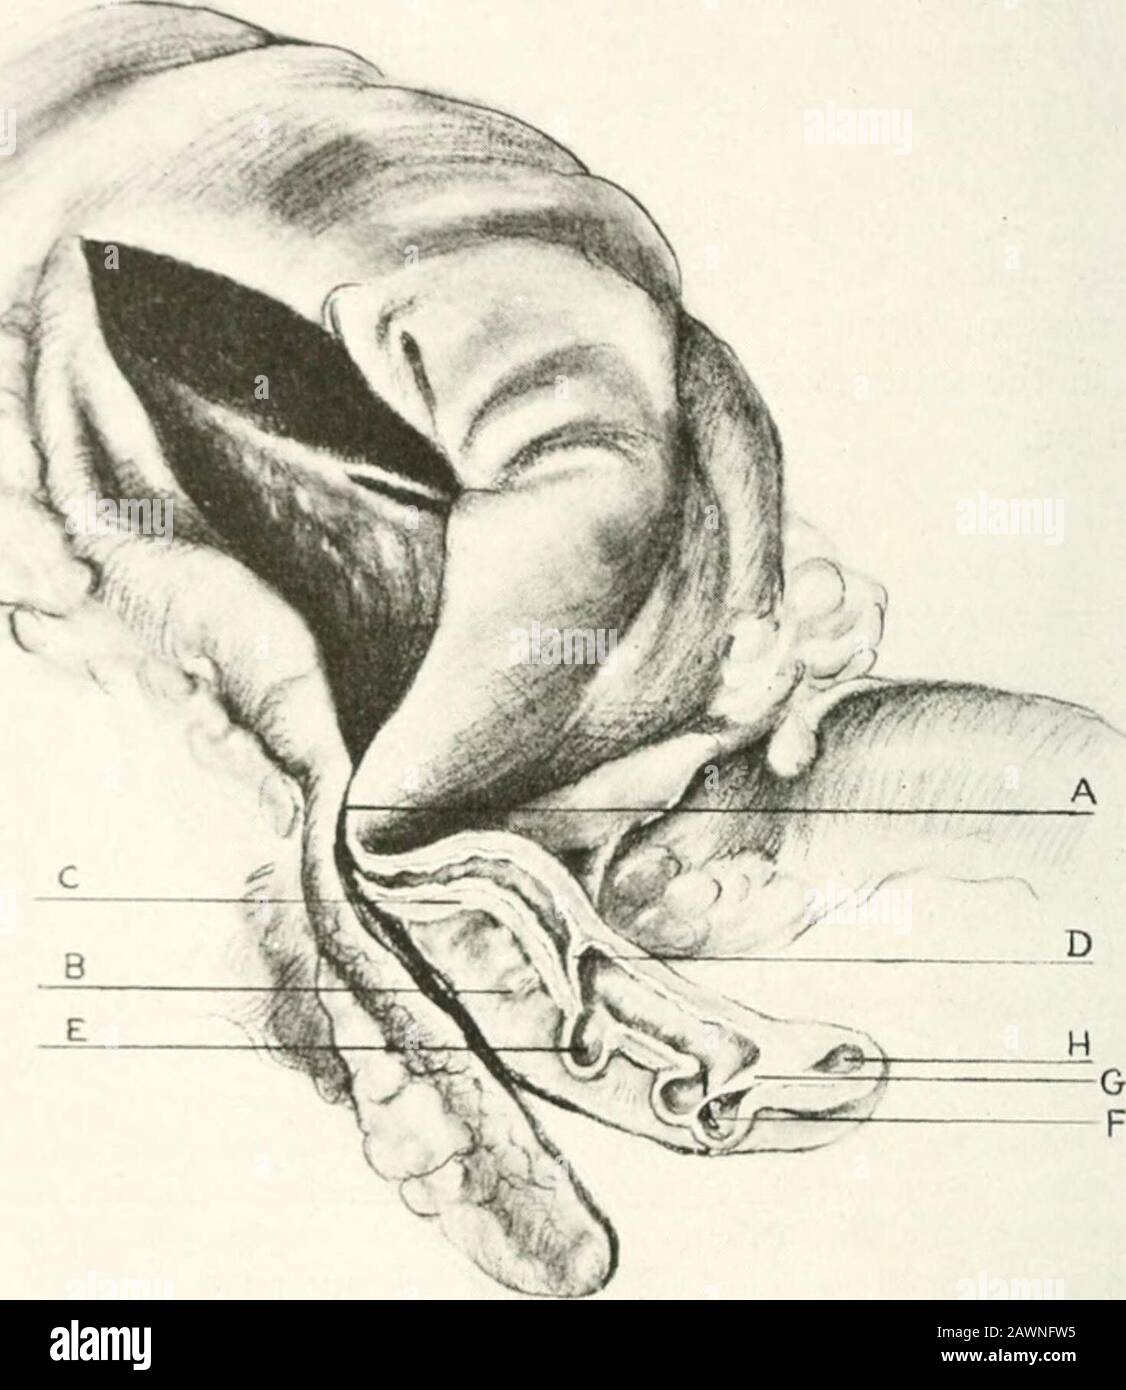 Studies from the laboratories of the Deptof Surgery . mesenteric border, through the moreproximal of which a protrusion of mucosa and submucosa had occurred for adistance of 4 mm. Through the more distal gap, not only had the mucosa andsubmucosa of the same side protruded, but also all the rest of the mucosa andsubmucosa of that region, so that the entire lumen had come to lie outsidethe appendix, within the sac of the diverticulum. From the diverticulum, thelumen passed back within the surrounding muscular coats once more in itscourse toward the tip, becoming markedly constricted as it did so Stock Photo